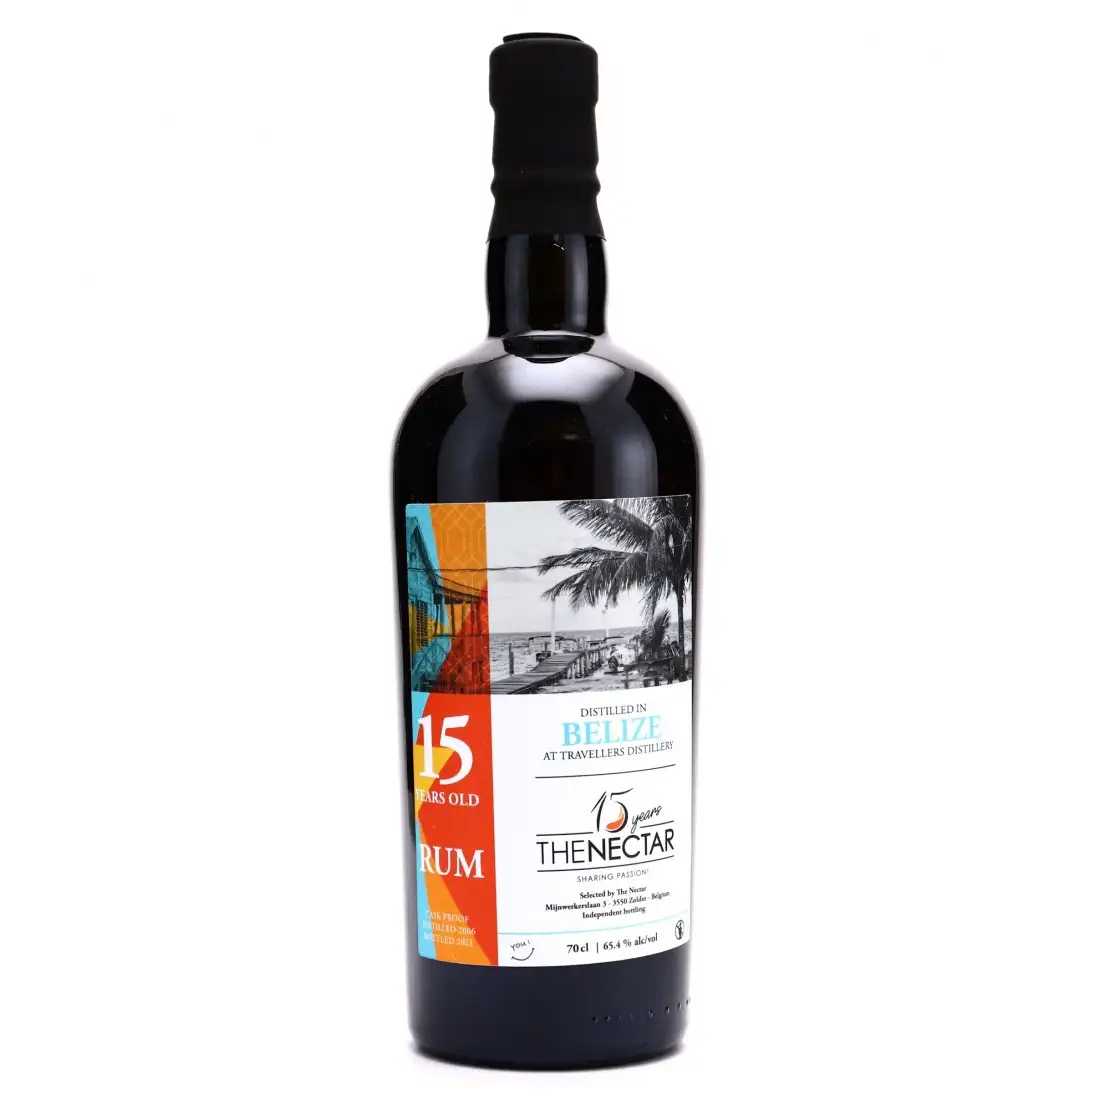 Belize RumX Rum | RumX Find Ratings Rums the Best with -